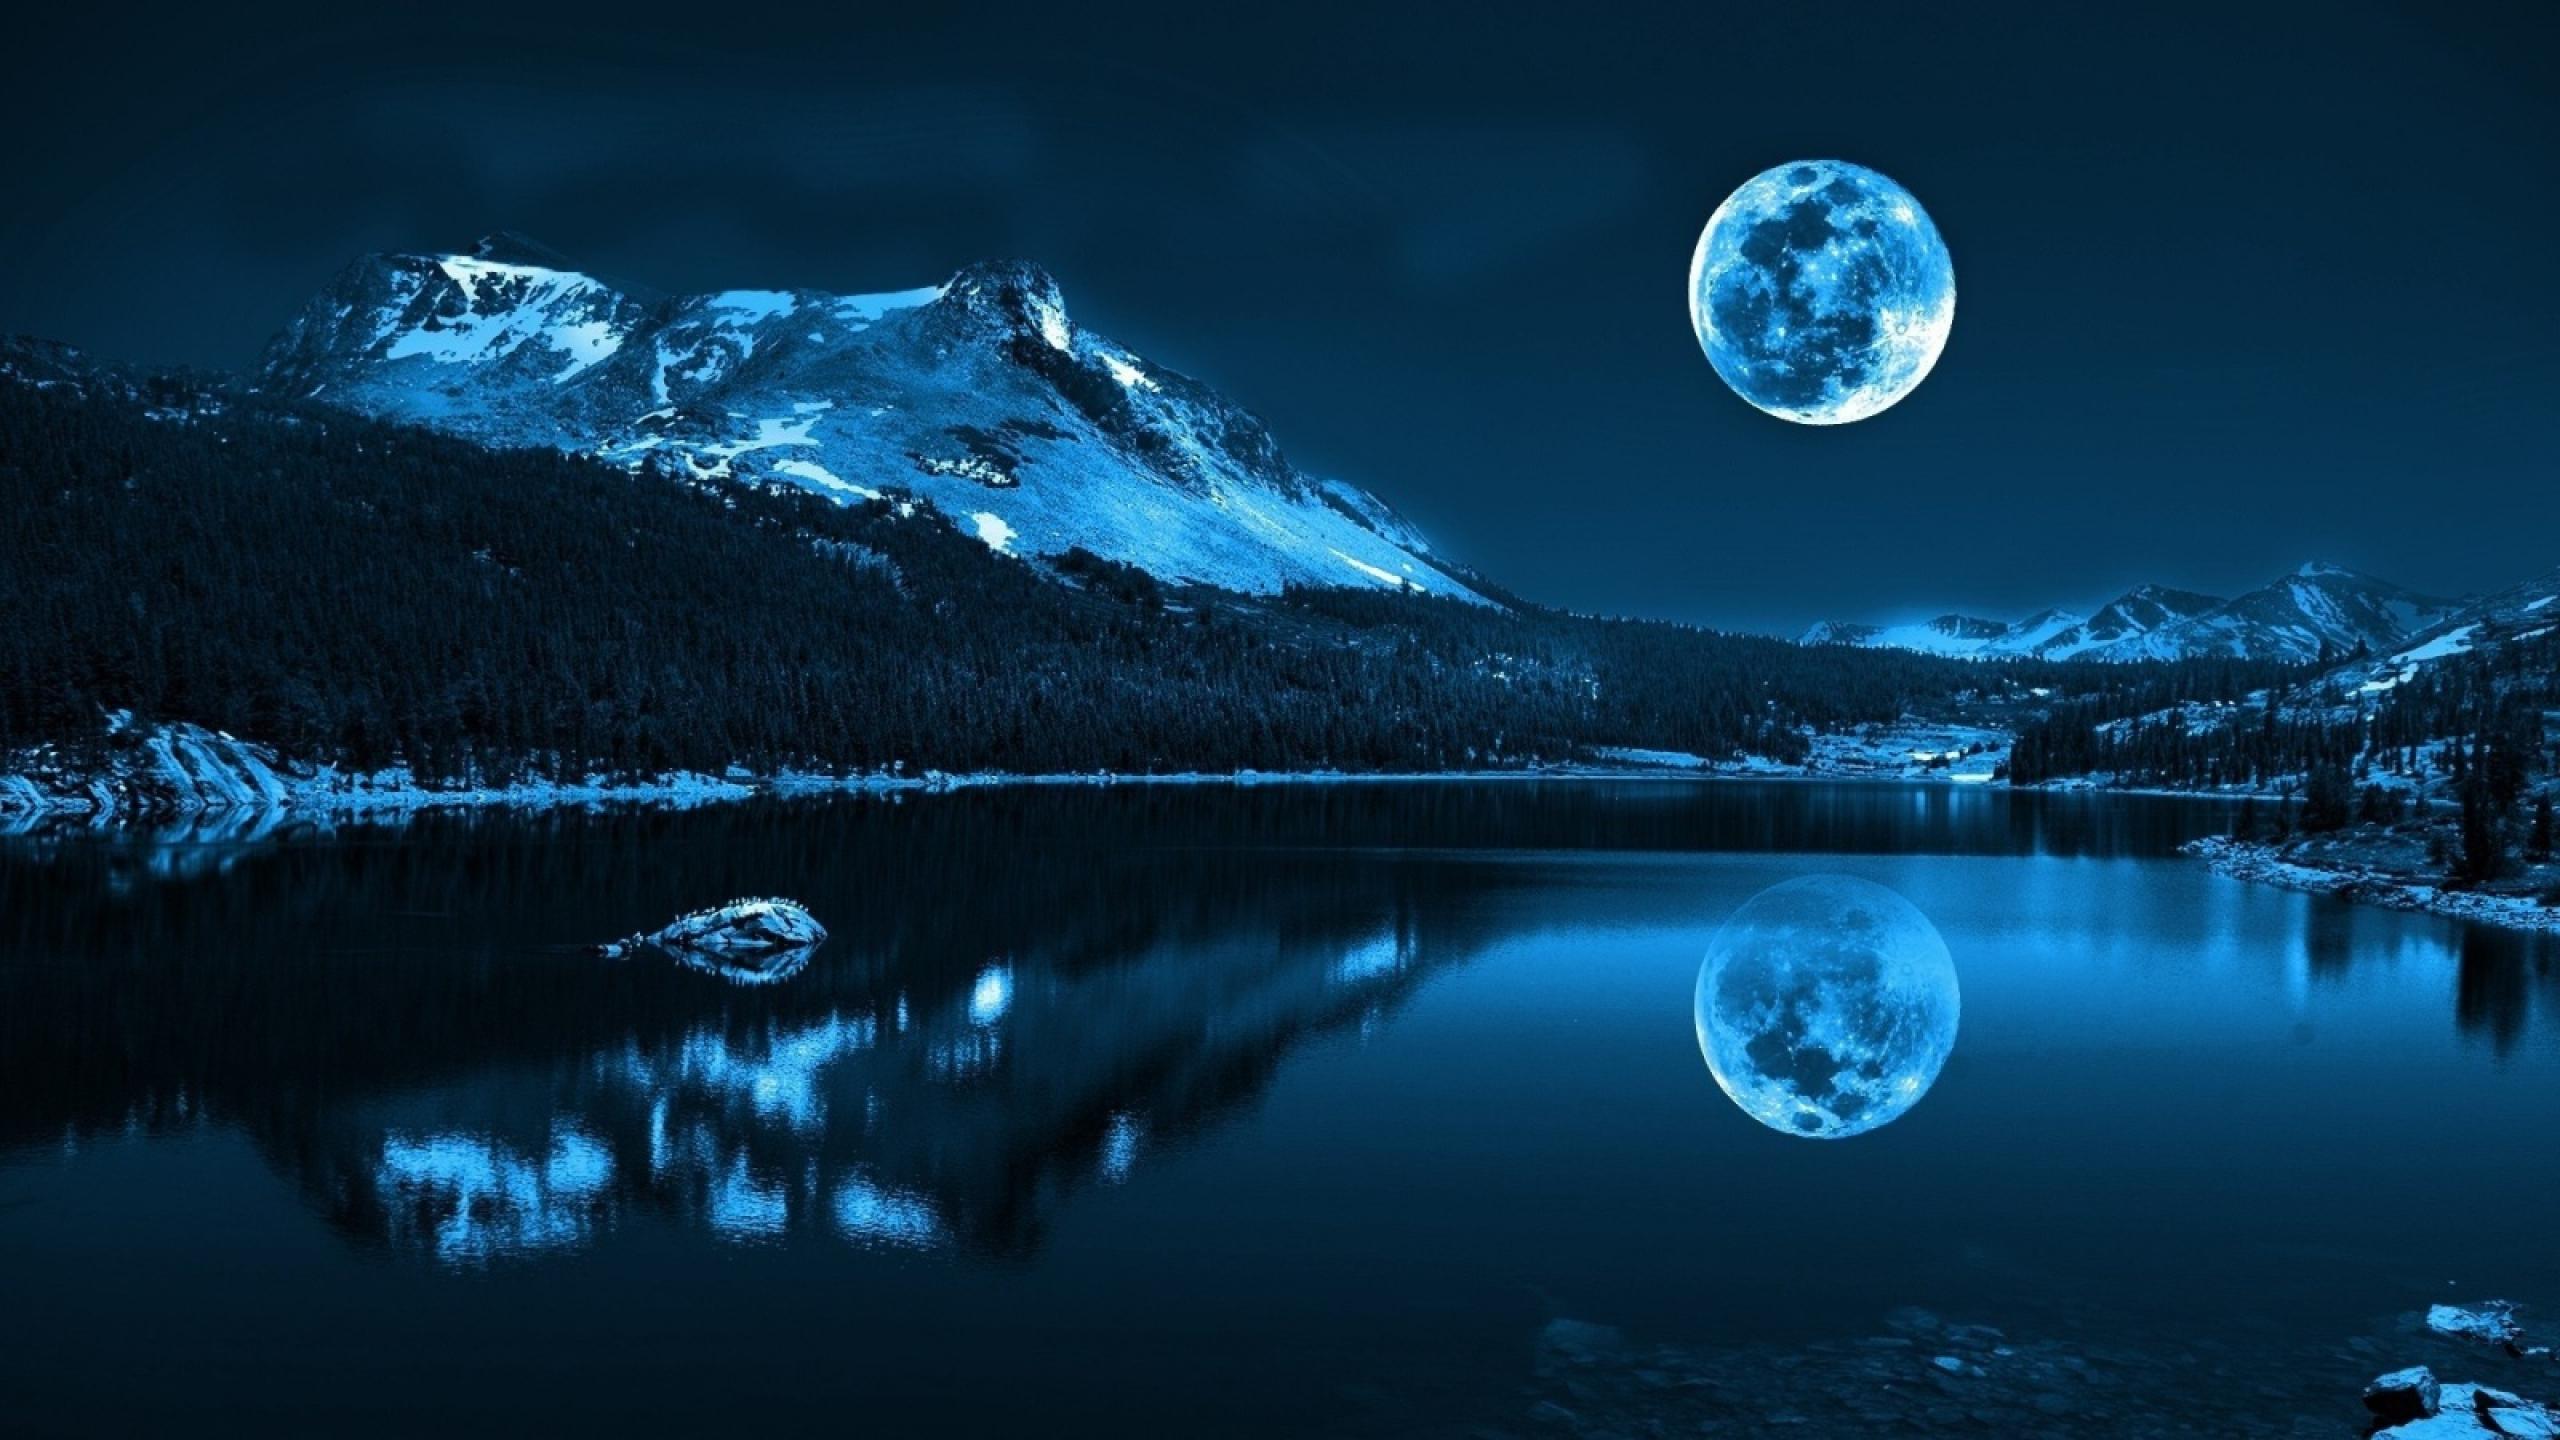 Amazing Nature Super Moon Wallpapers Wallpaper High resolution